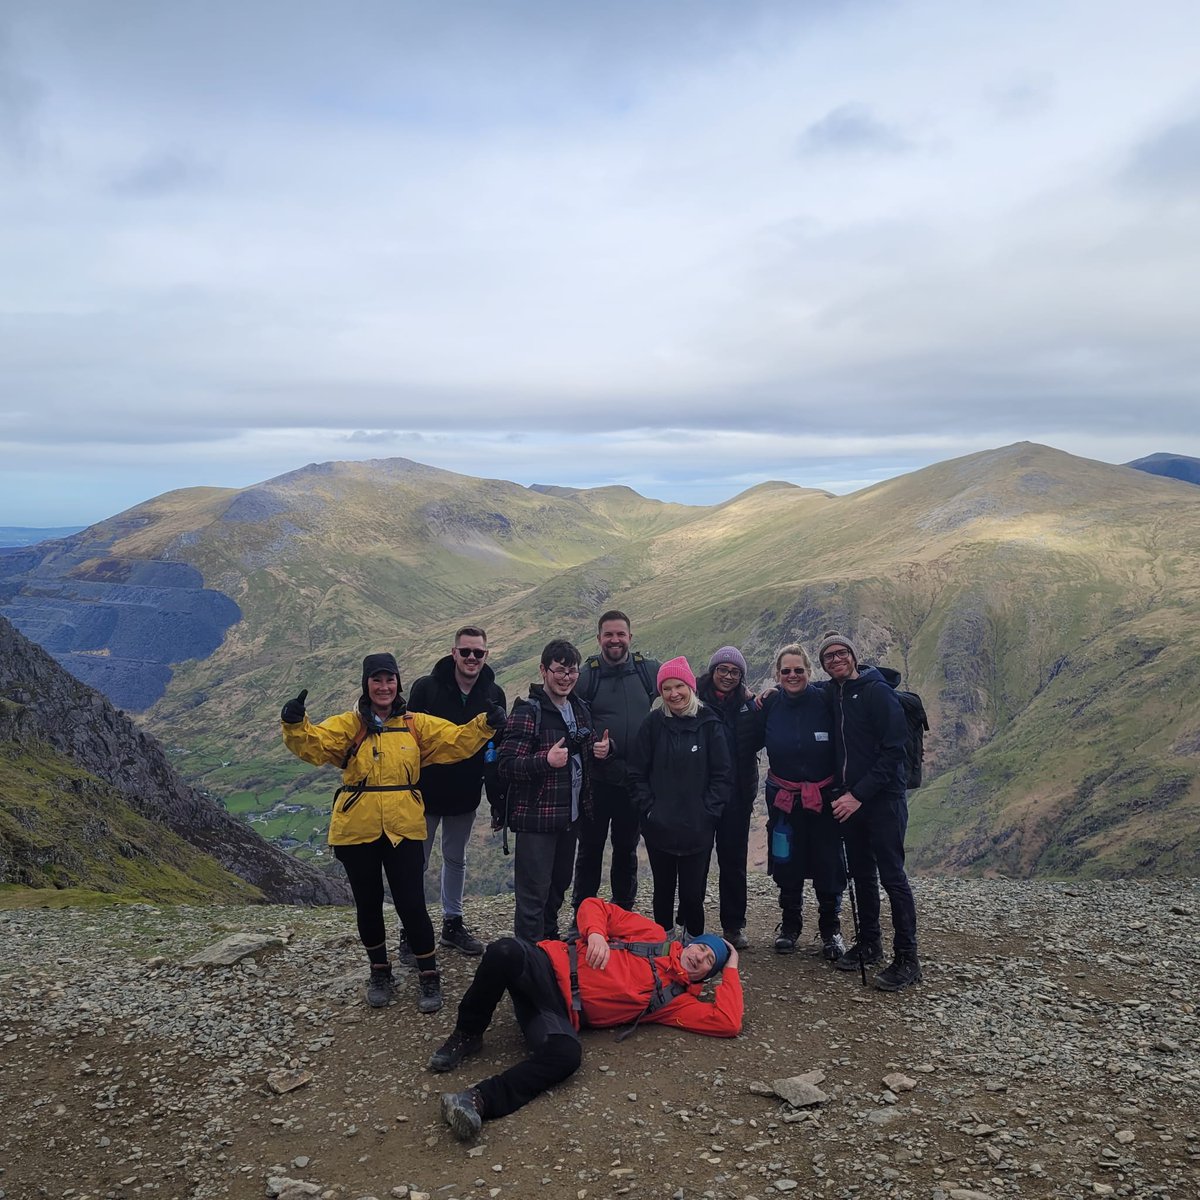 Huge congratulations to the traders that climbed Snowdown this weekend! The hikers are raising money for two brilliant charities: Claire House & Warrington Youth Zone. If you would likely to kindly donate for this great cause please follow the link.. gofund.me/d58a9998